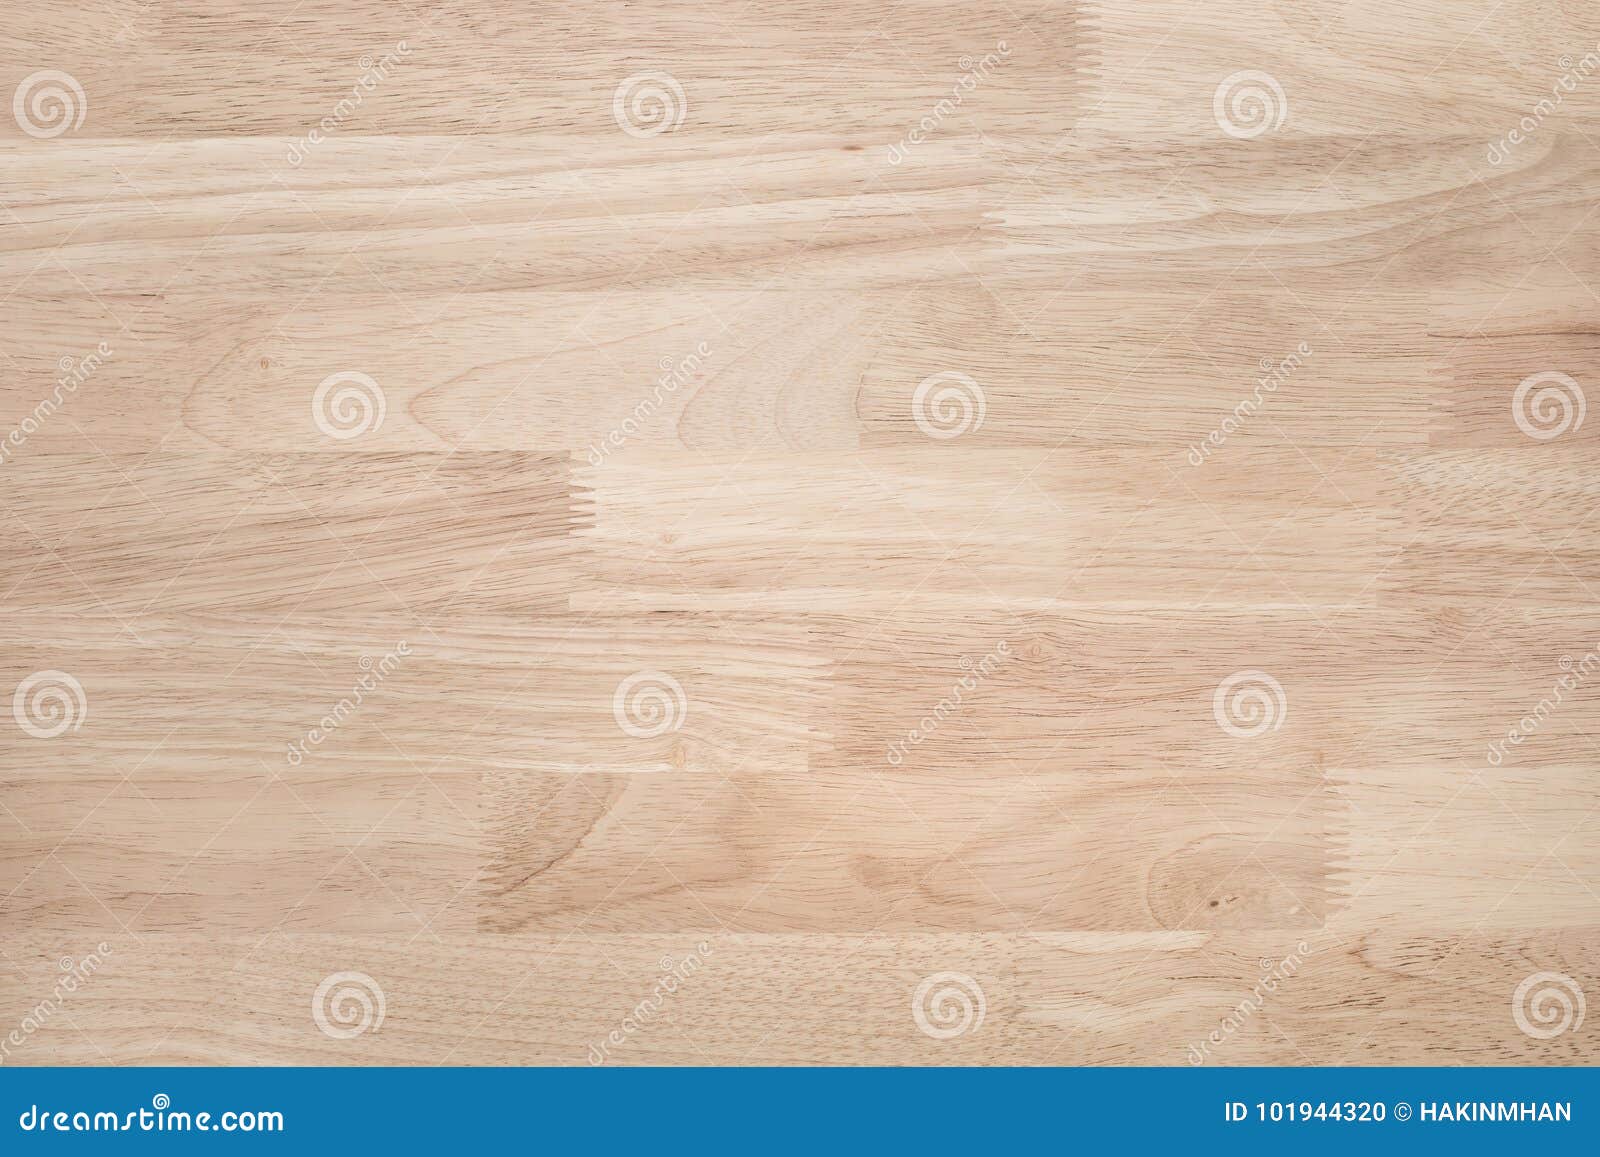 real wood table top texture backgrounds.